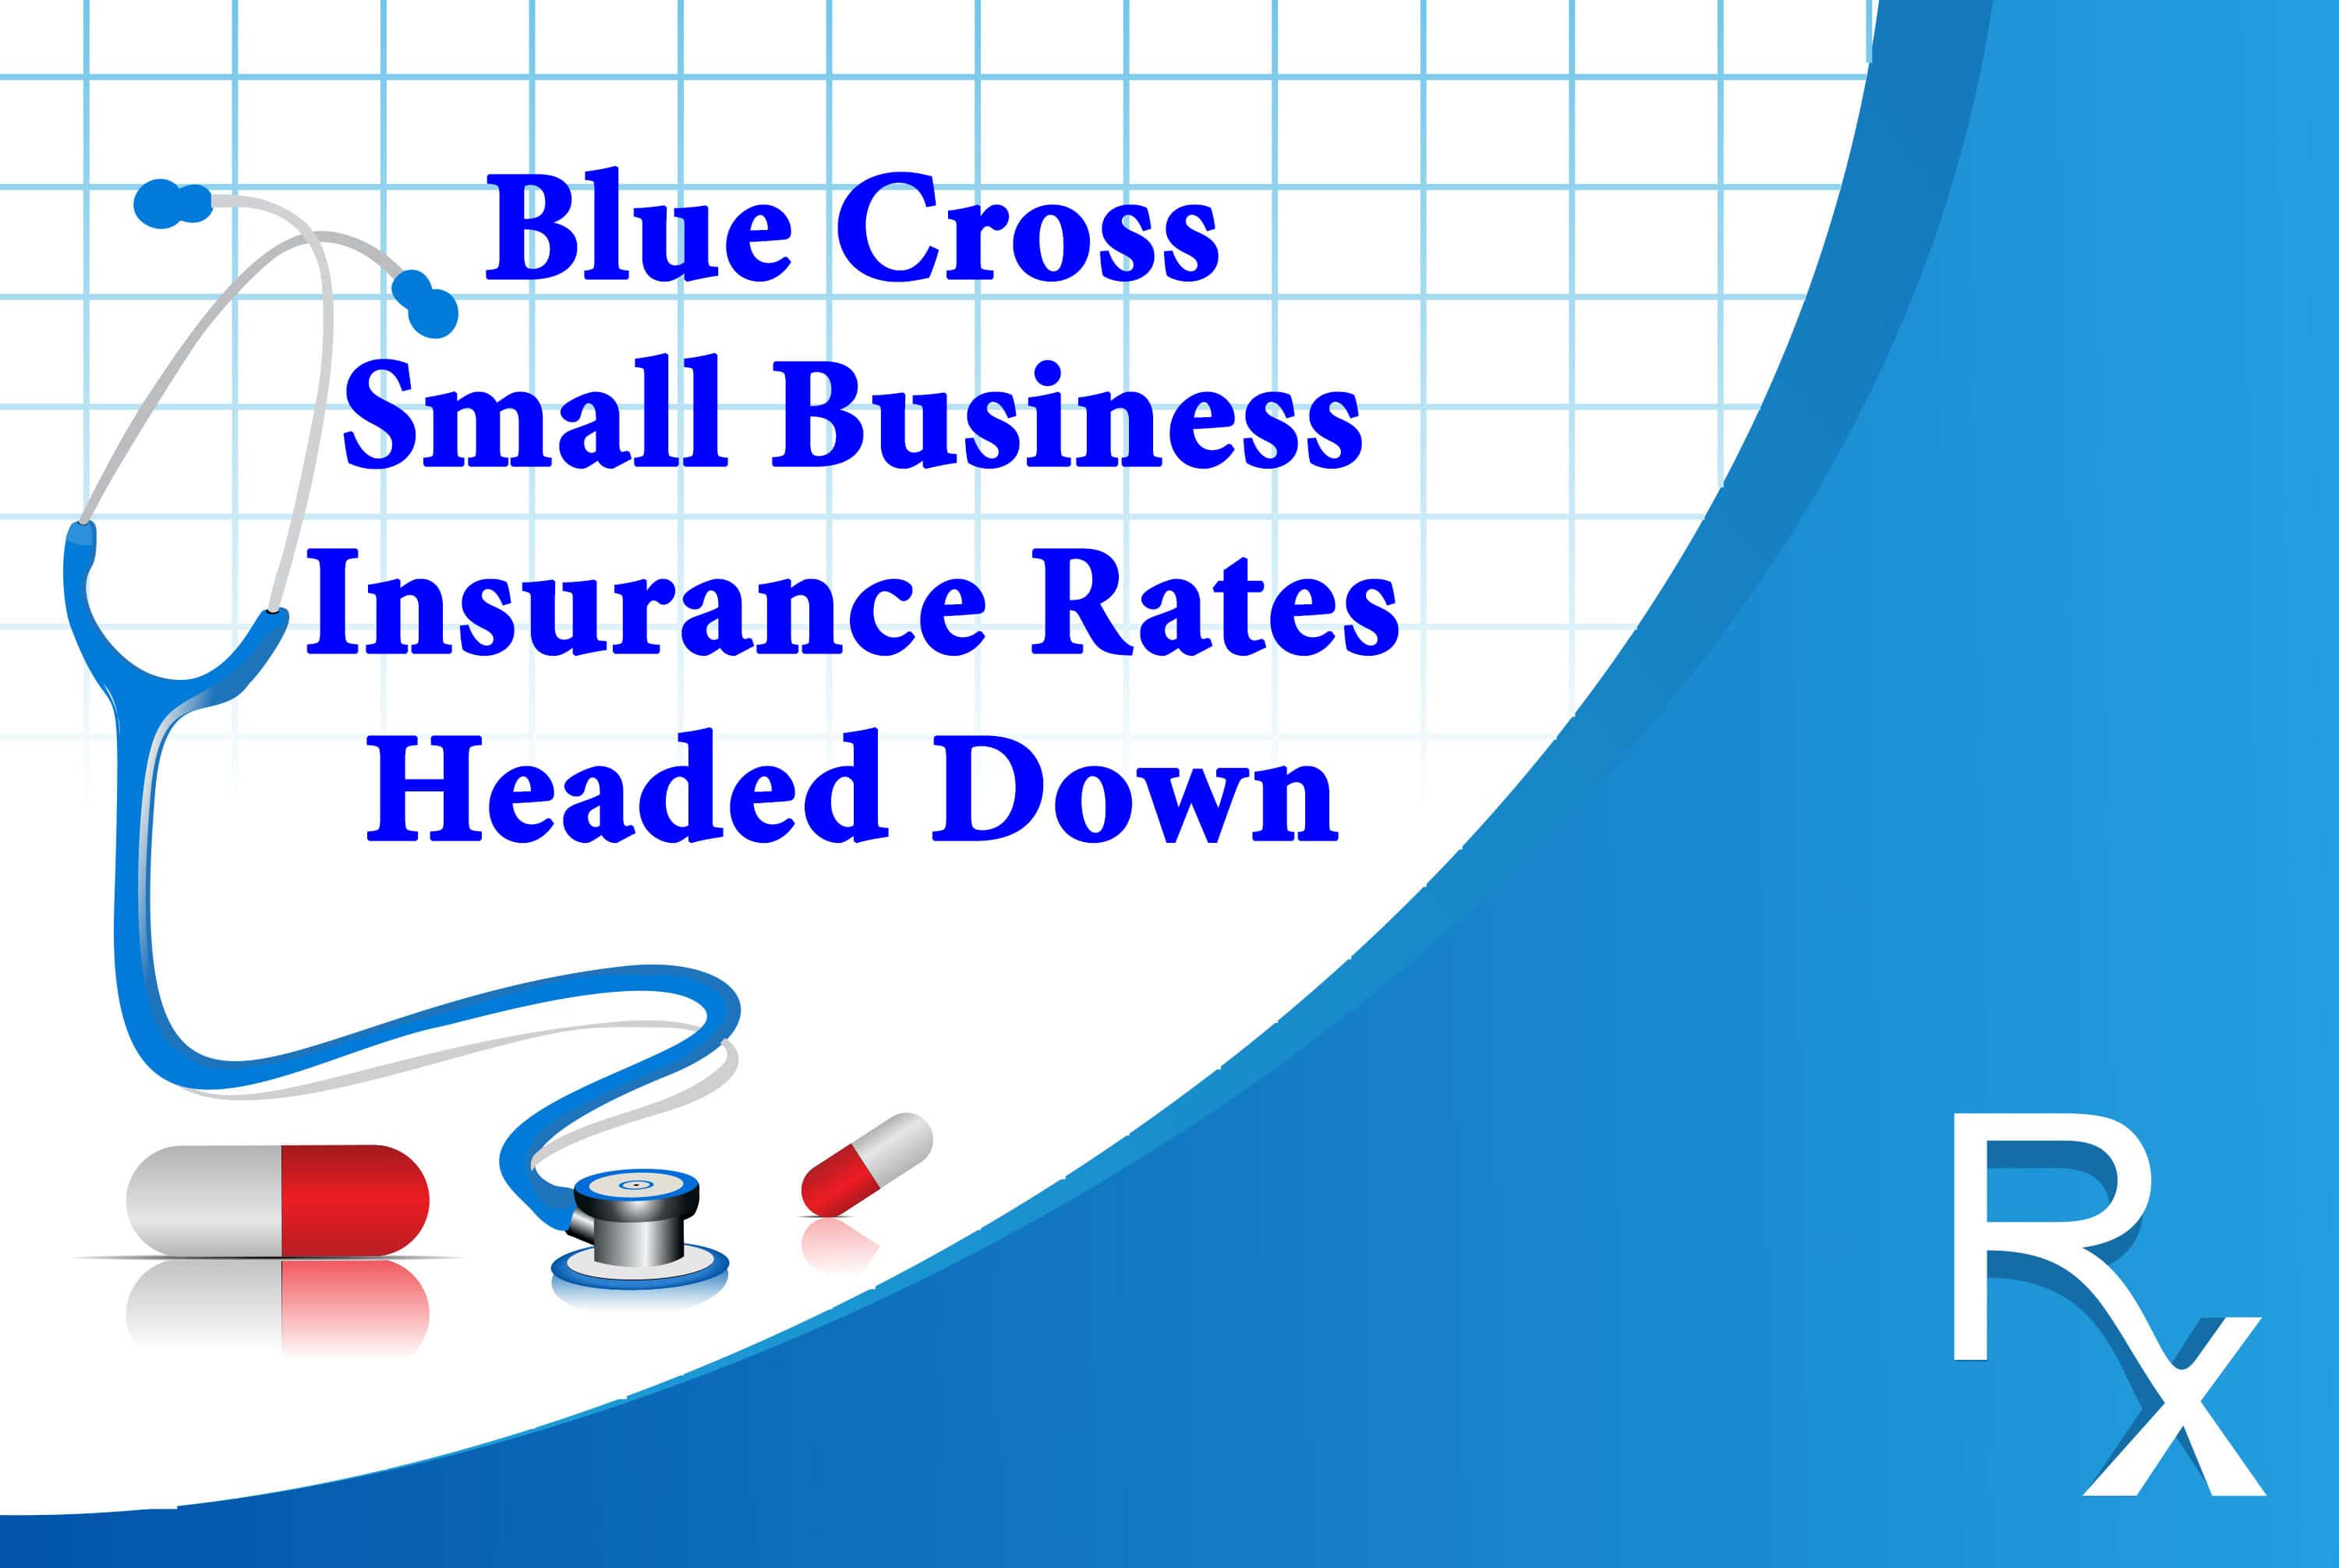 Blue Cross to Lower Rates for Small Business in Michigan Moody on the